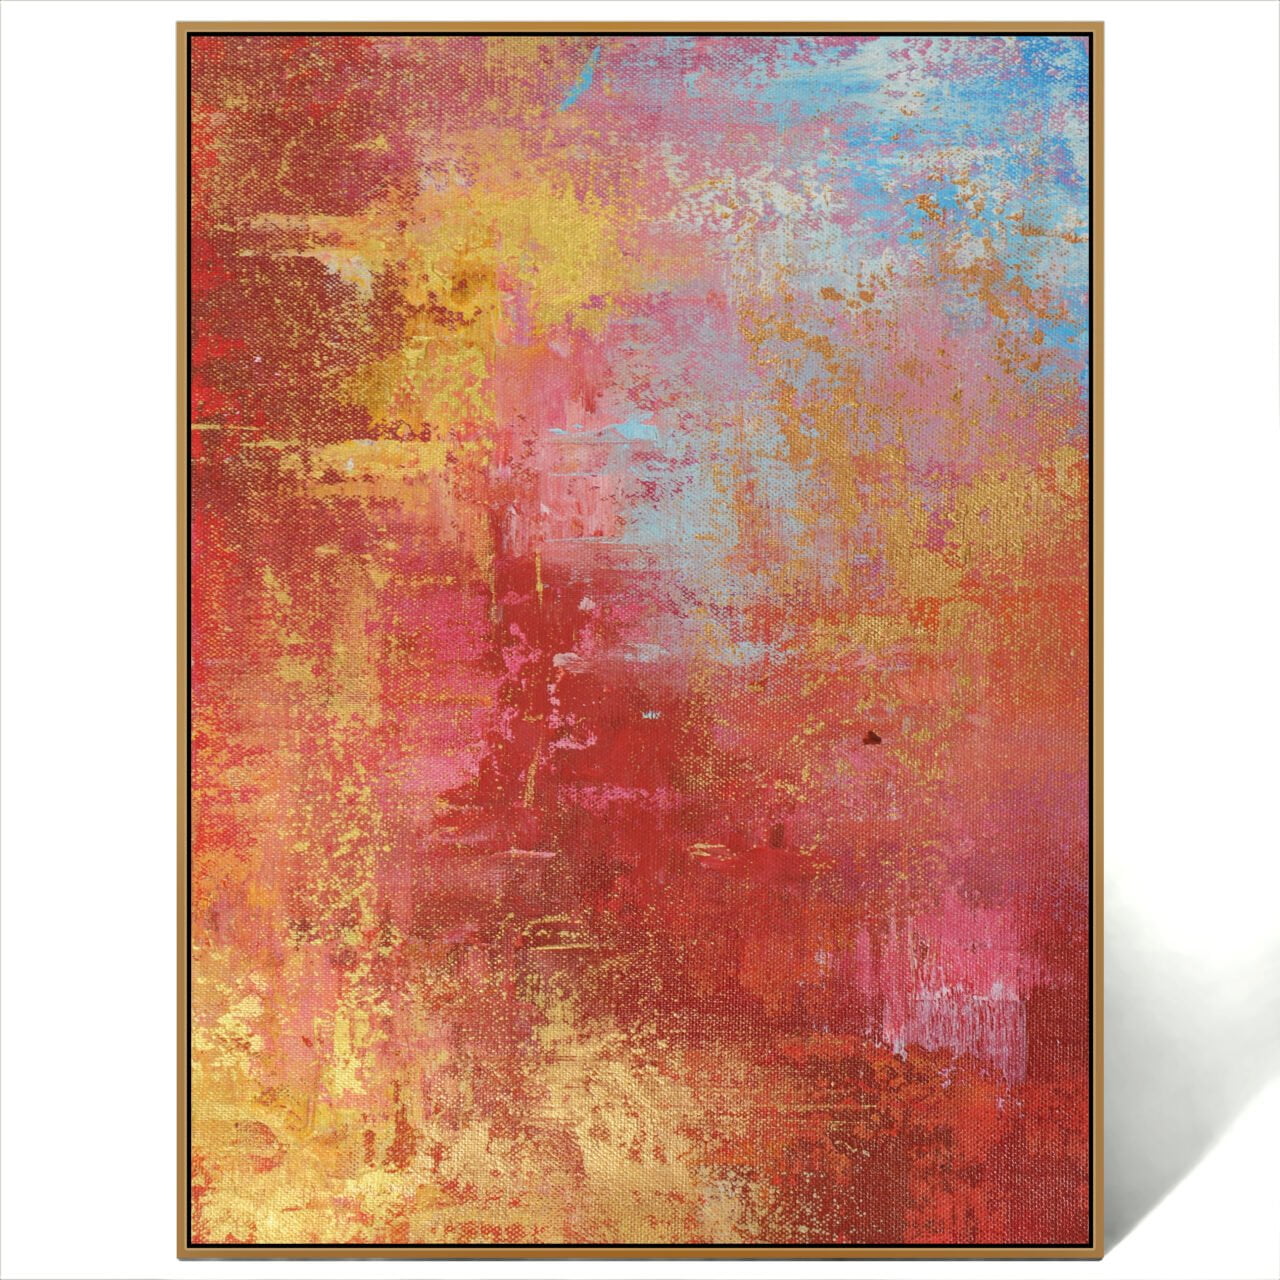 Abstract Red And Gold Artwork On Canvas Wall Decor Painting